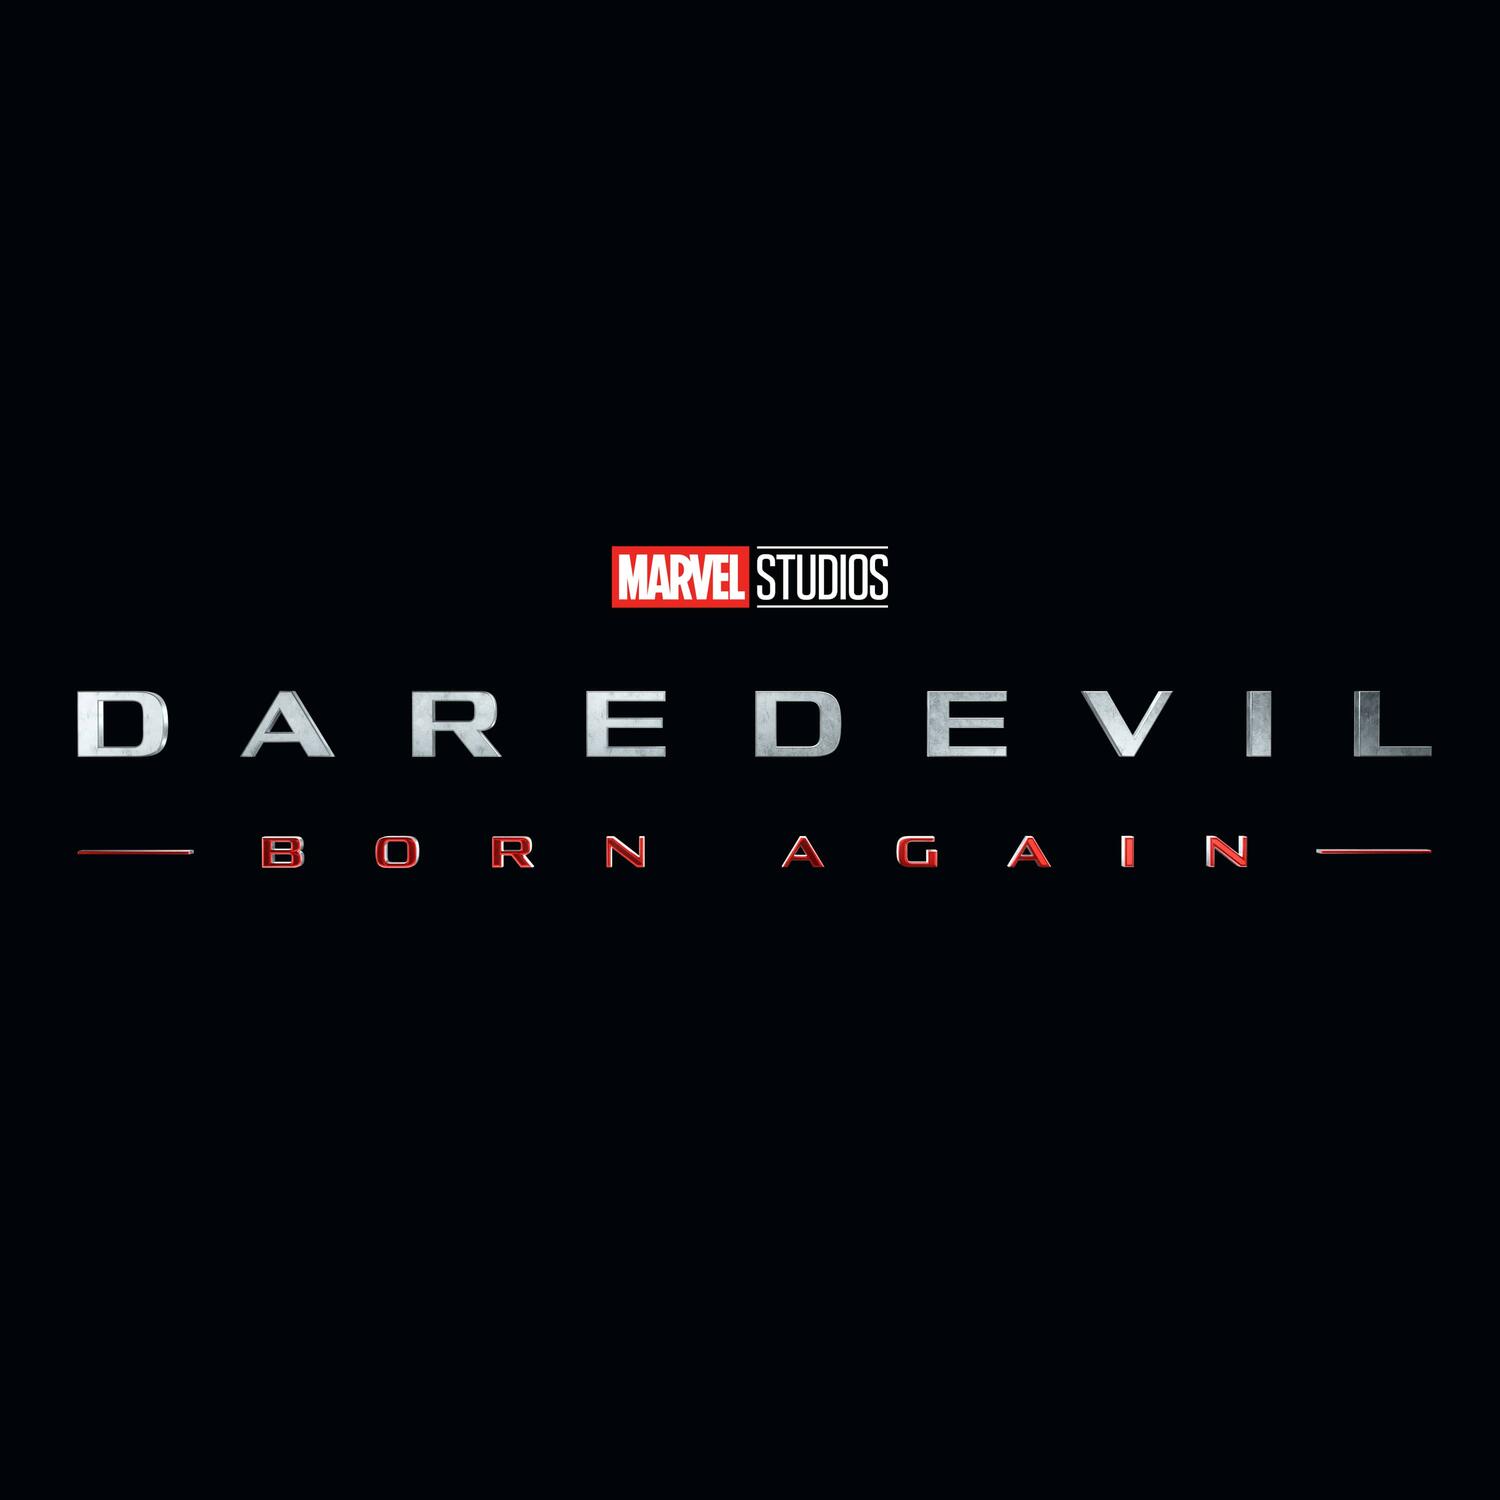 Marvel's 'Daredevil' Series Announced At SDCC - FreebieMNL